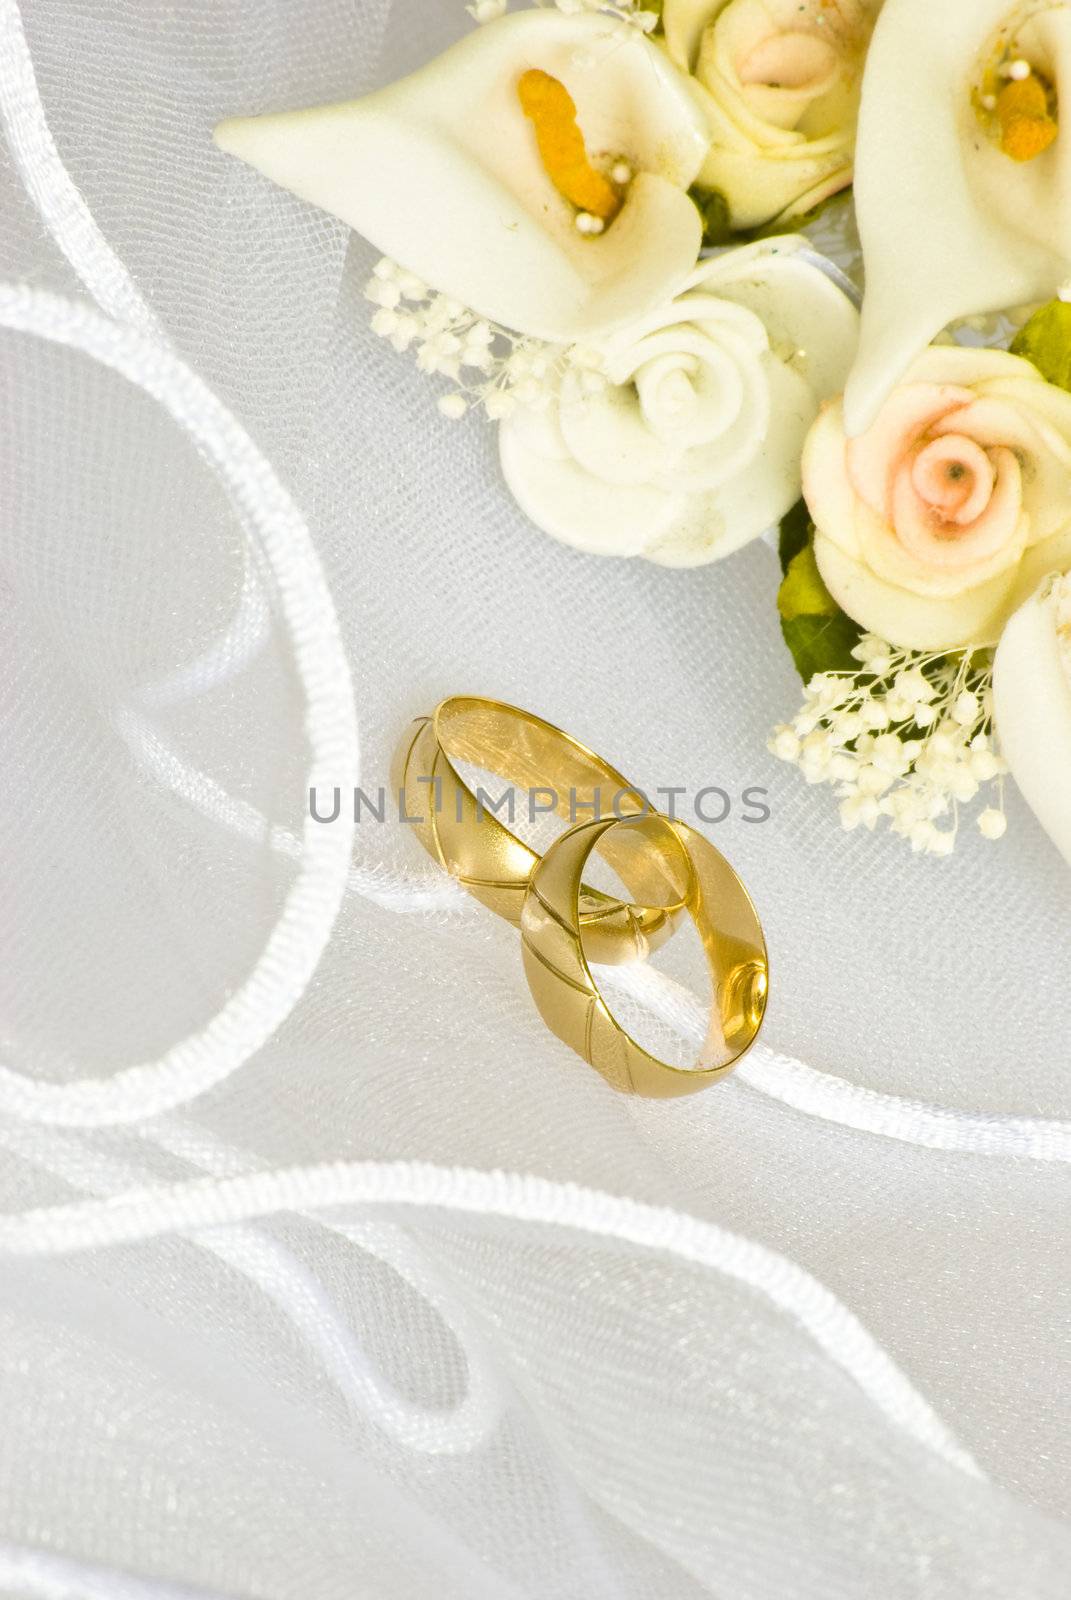 wedding rings and flowers over veil by Dessie_bg